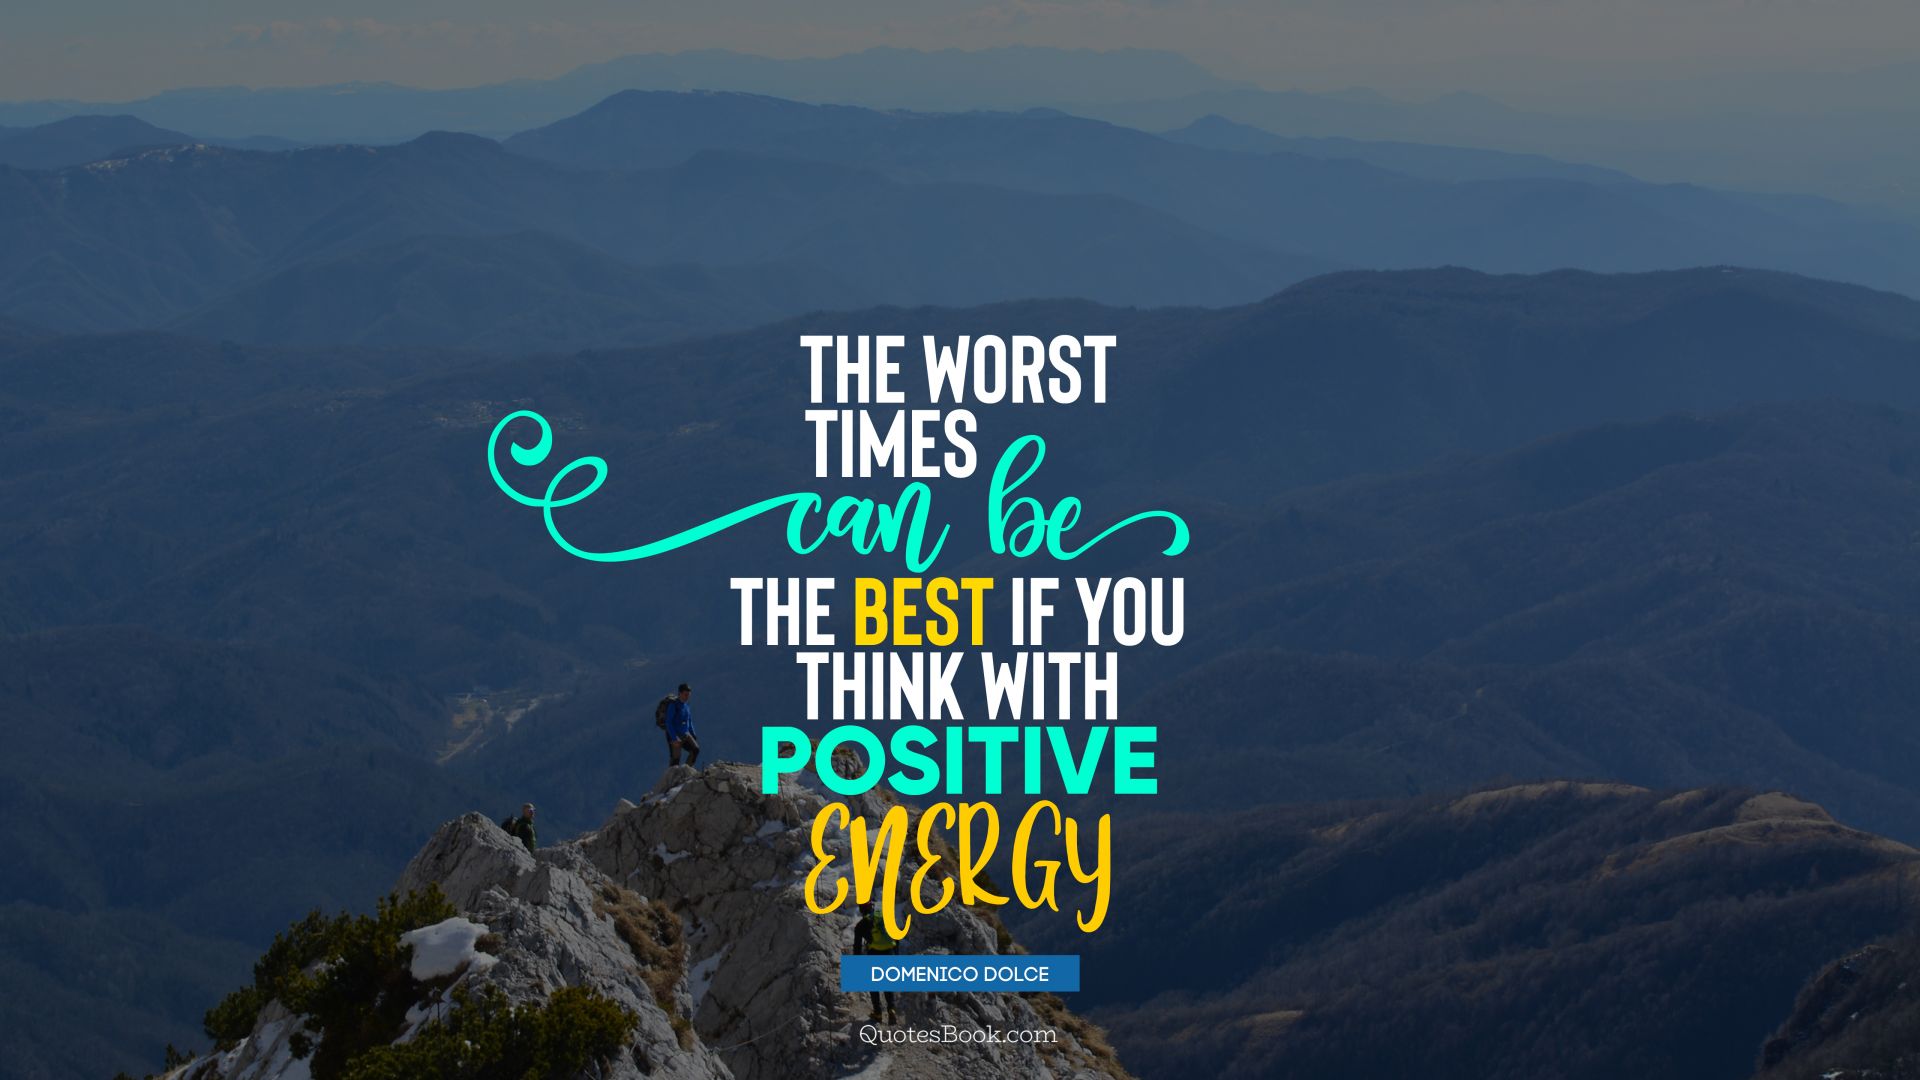 The worst times can be the best if you think with positive energy. - Quote  by Domenico Dolce - QuotesBook